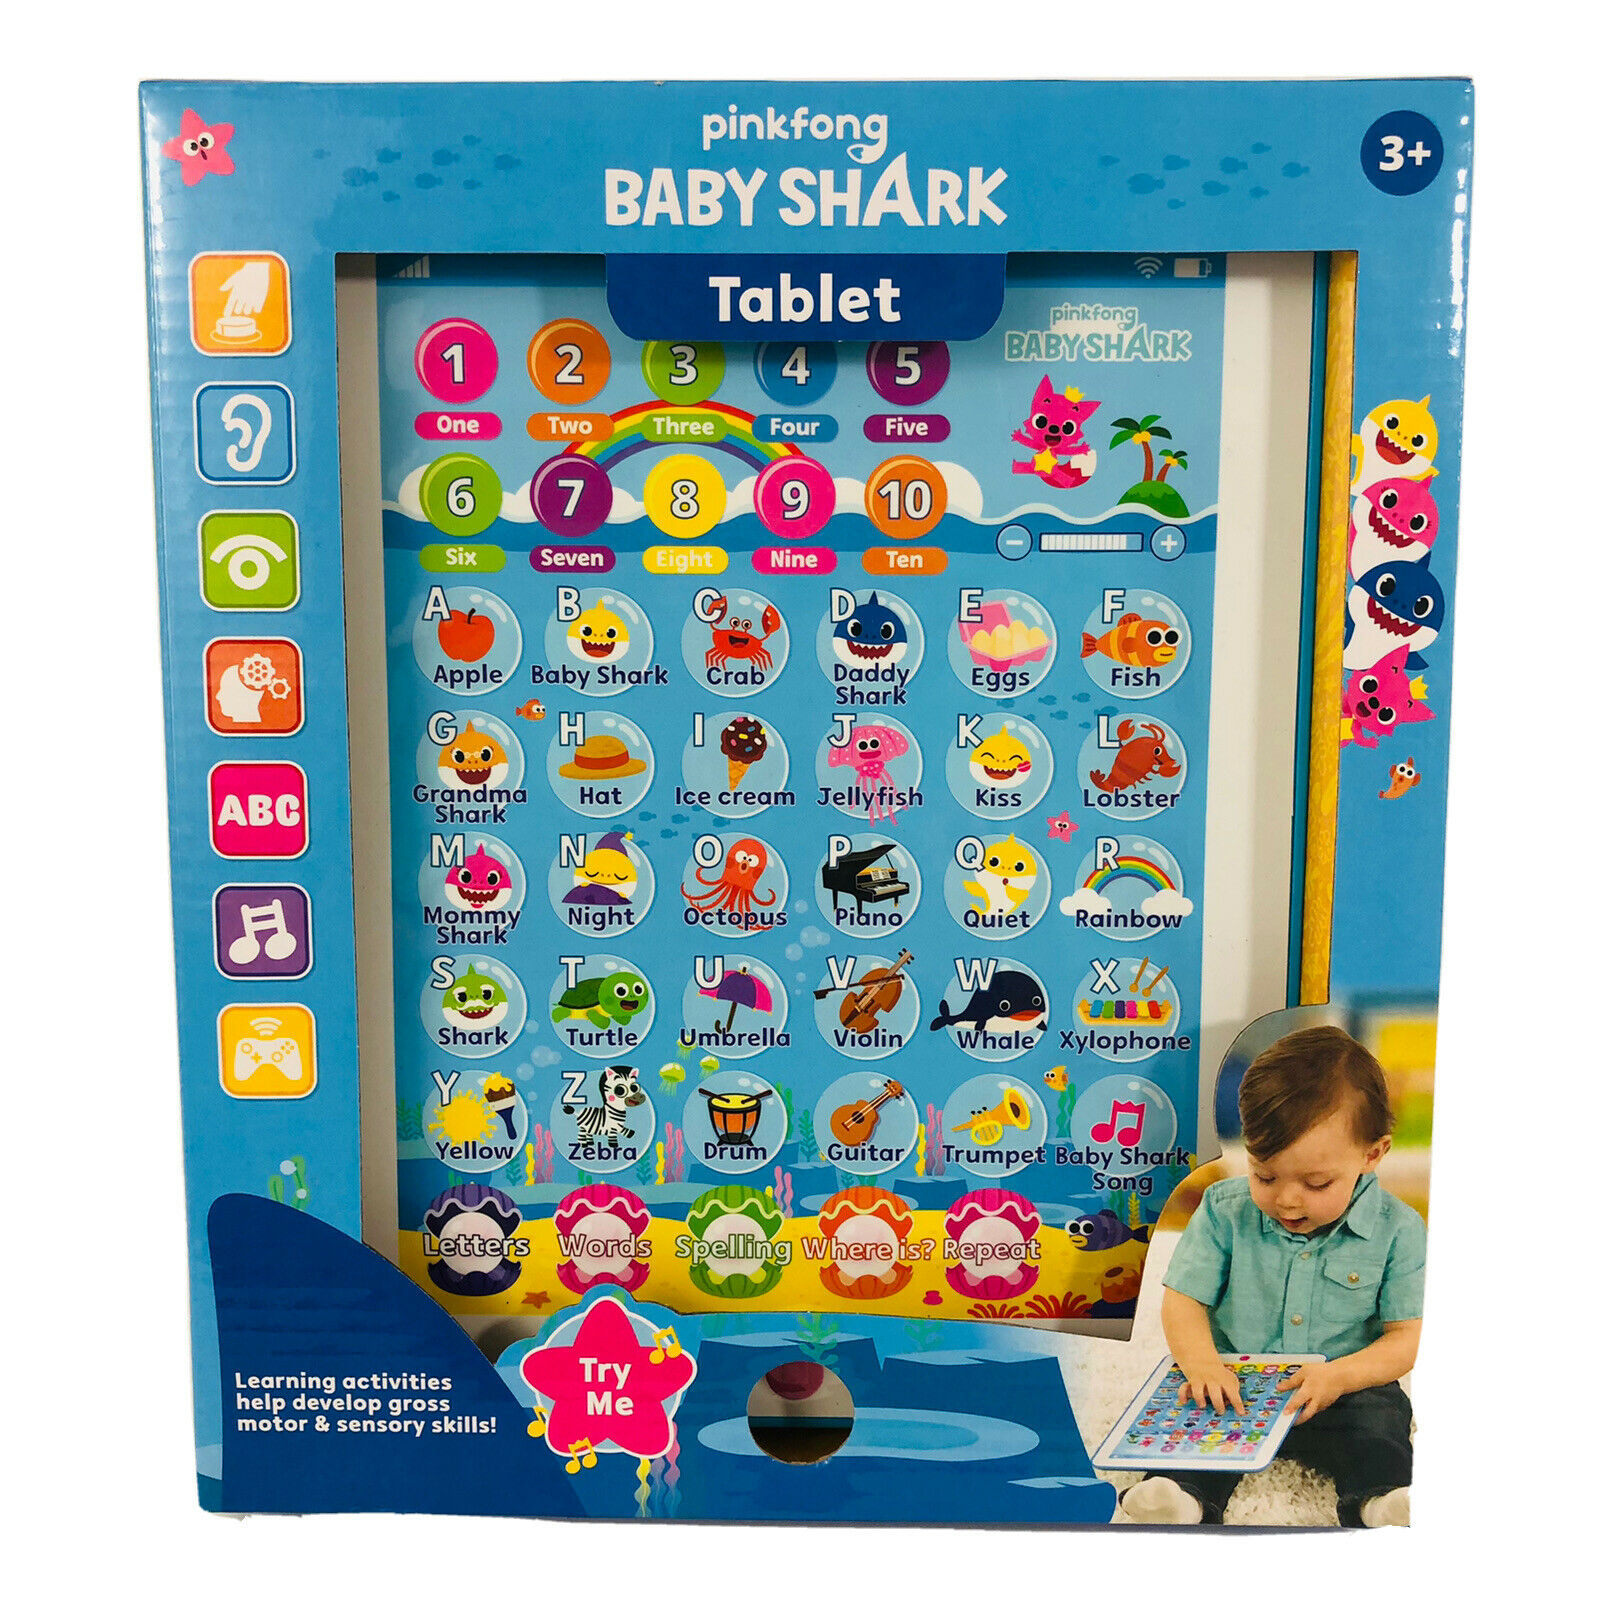 Pinkfrog Baby Shark Tablet Interactive Educational Learning Toy Computer New